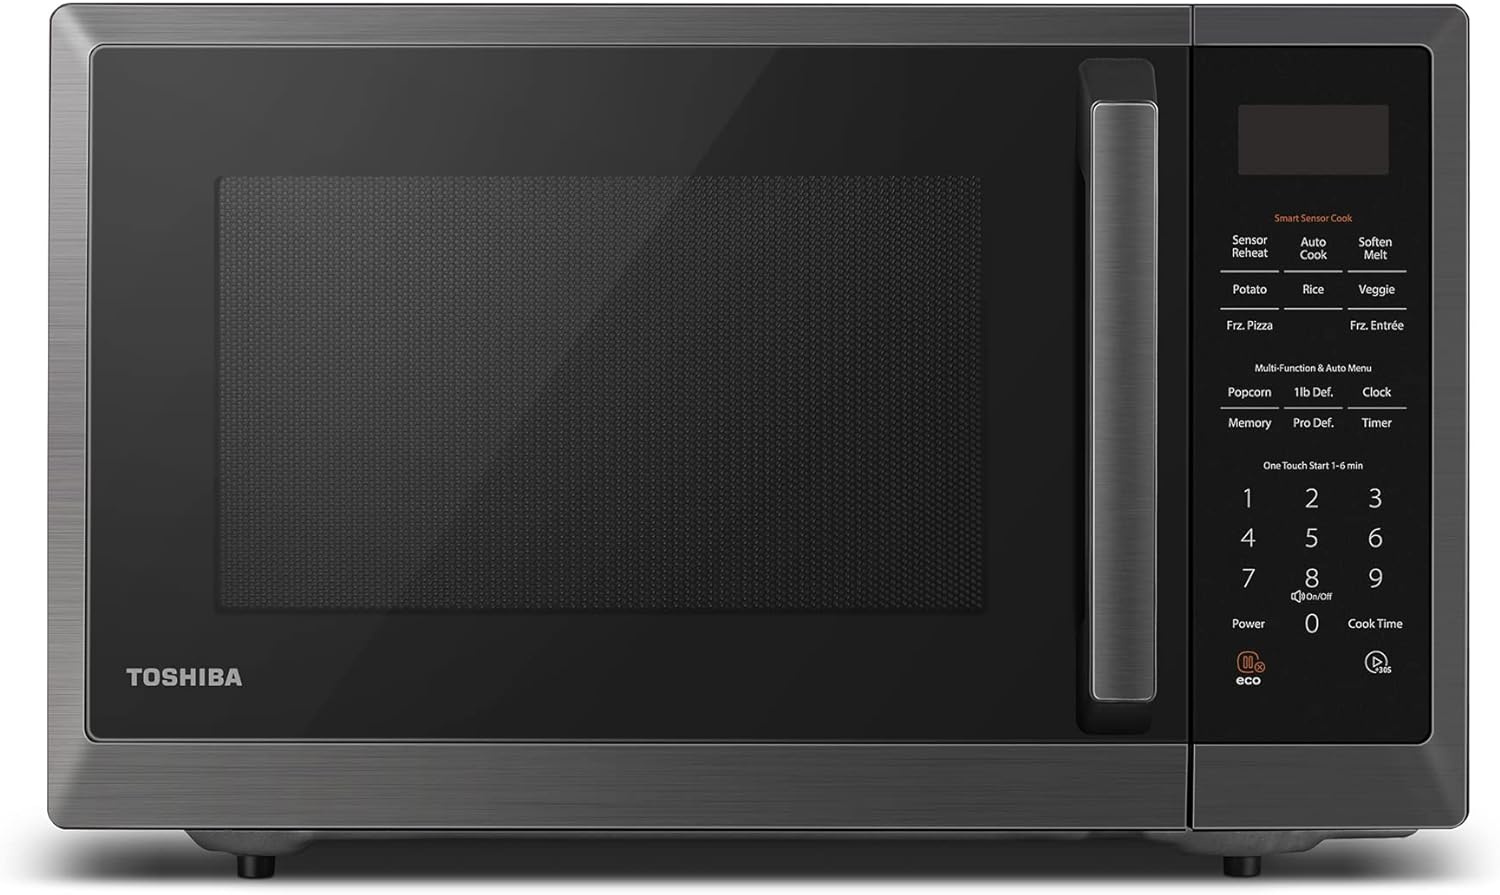 My family started using Microwave ovens in the late 1970' they were enormous back then but they were powerful and did a good job.The first one I purchased for myself was a 1100 watt magic chef in the late 1980' it travelled with me for decades and worked great for something like 20 years and was still working when I gave it to a friend.Then in the 2000' I noticed a shift where it was not common to find 1100 watt microwaves and it has continued till this day where 1000 watts is where most top 